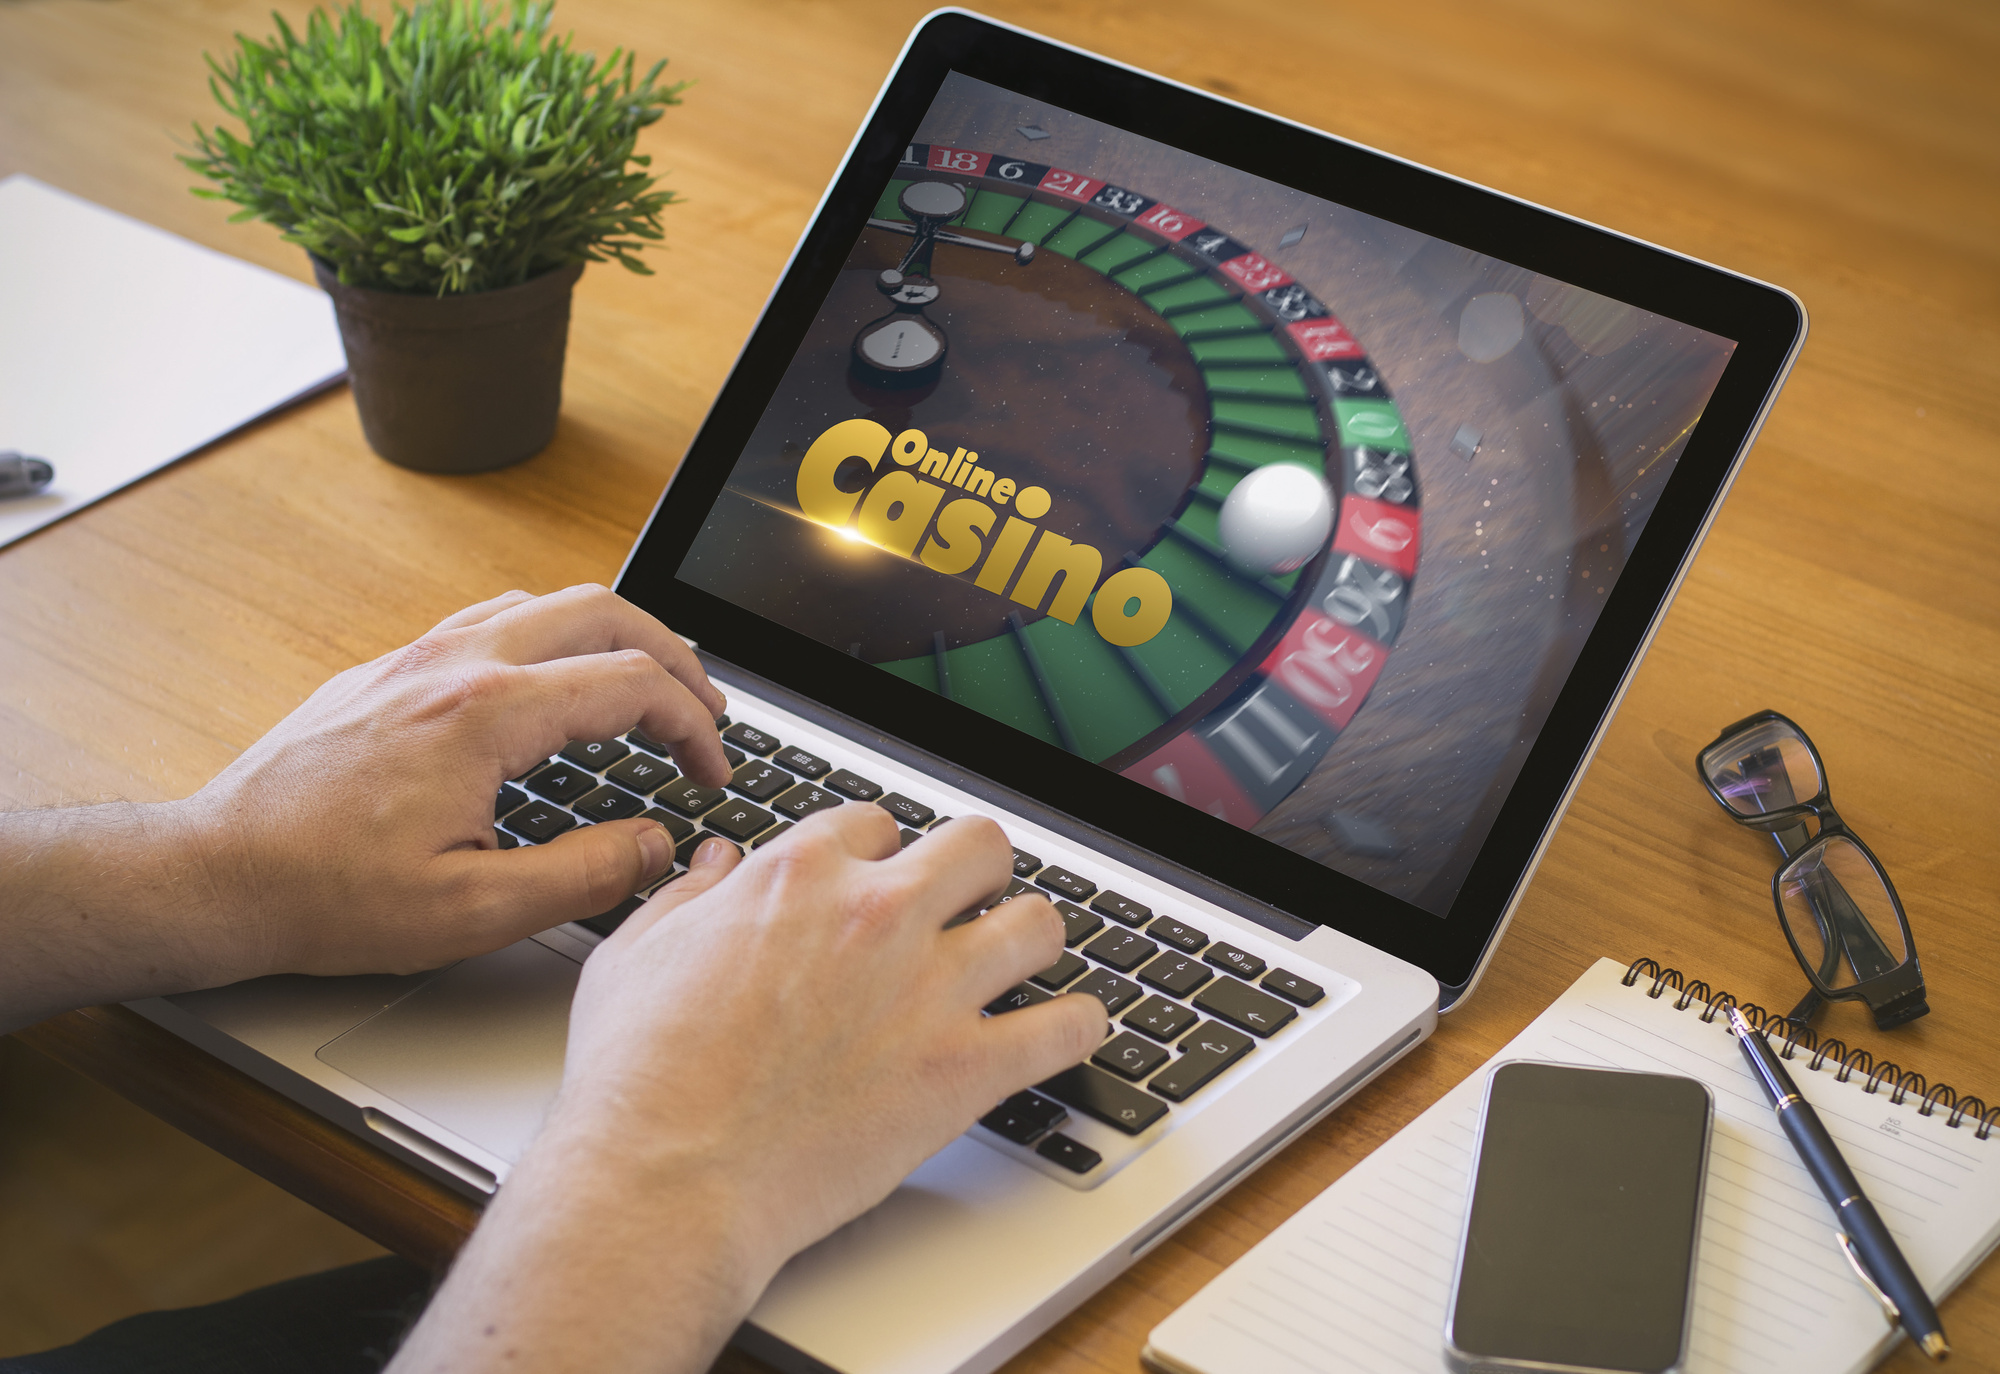 How Do I Choose the Best Online Casino to Gamble My Winnings?